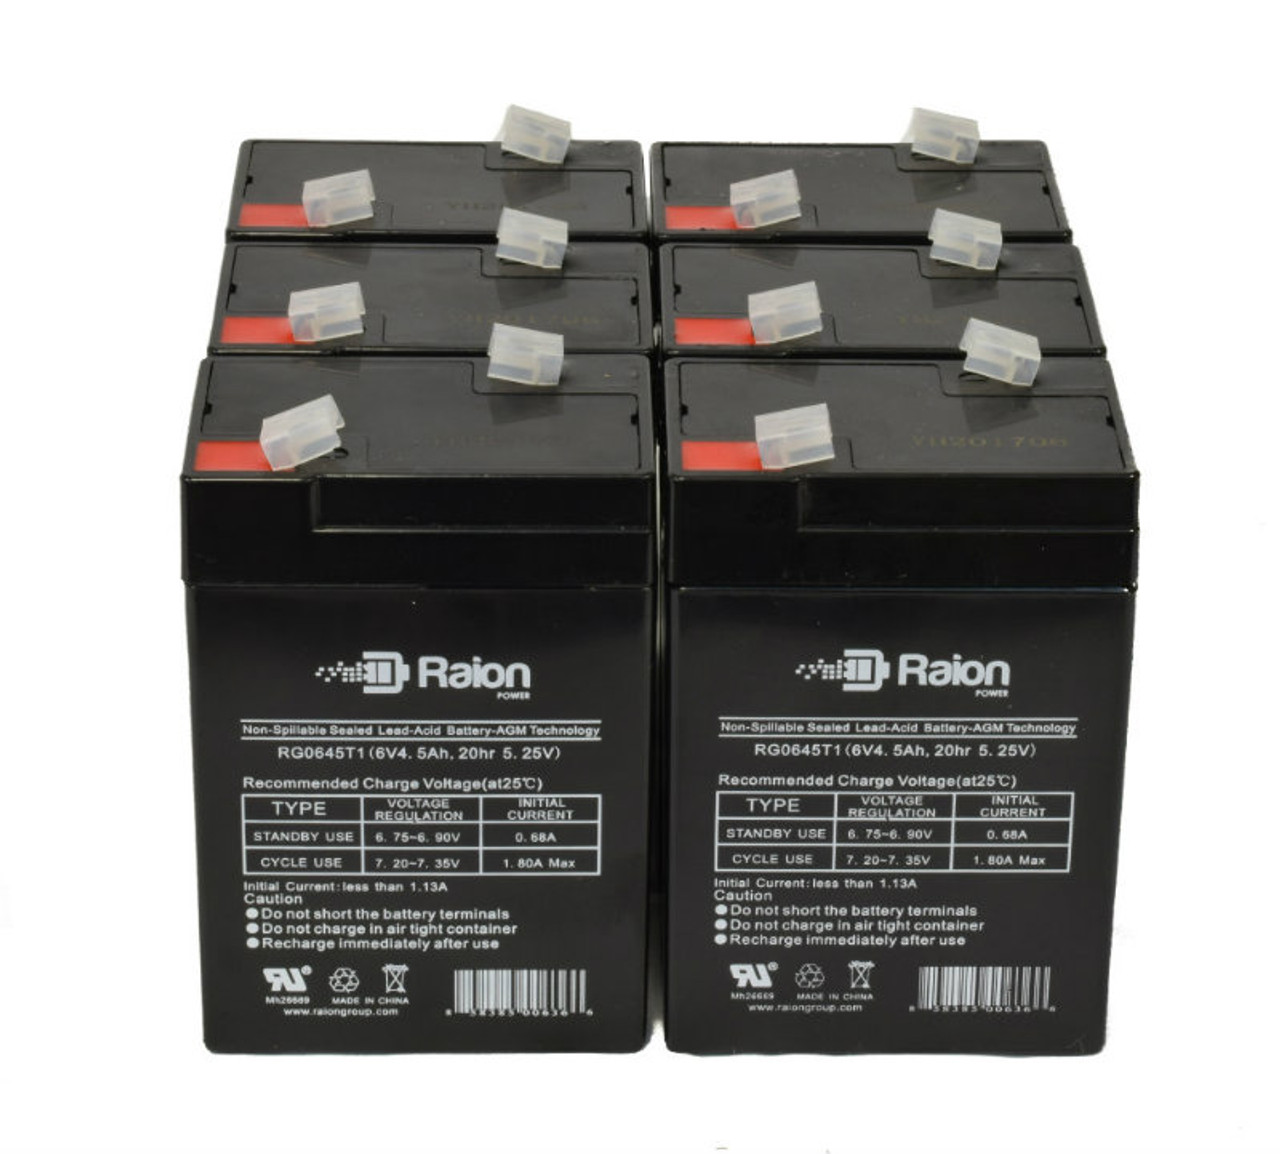 Raion Power 6 Volt 4.5Ah RG0645T1 Replacement Battery for Weiboer GB6-6 - 6 Pack